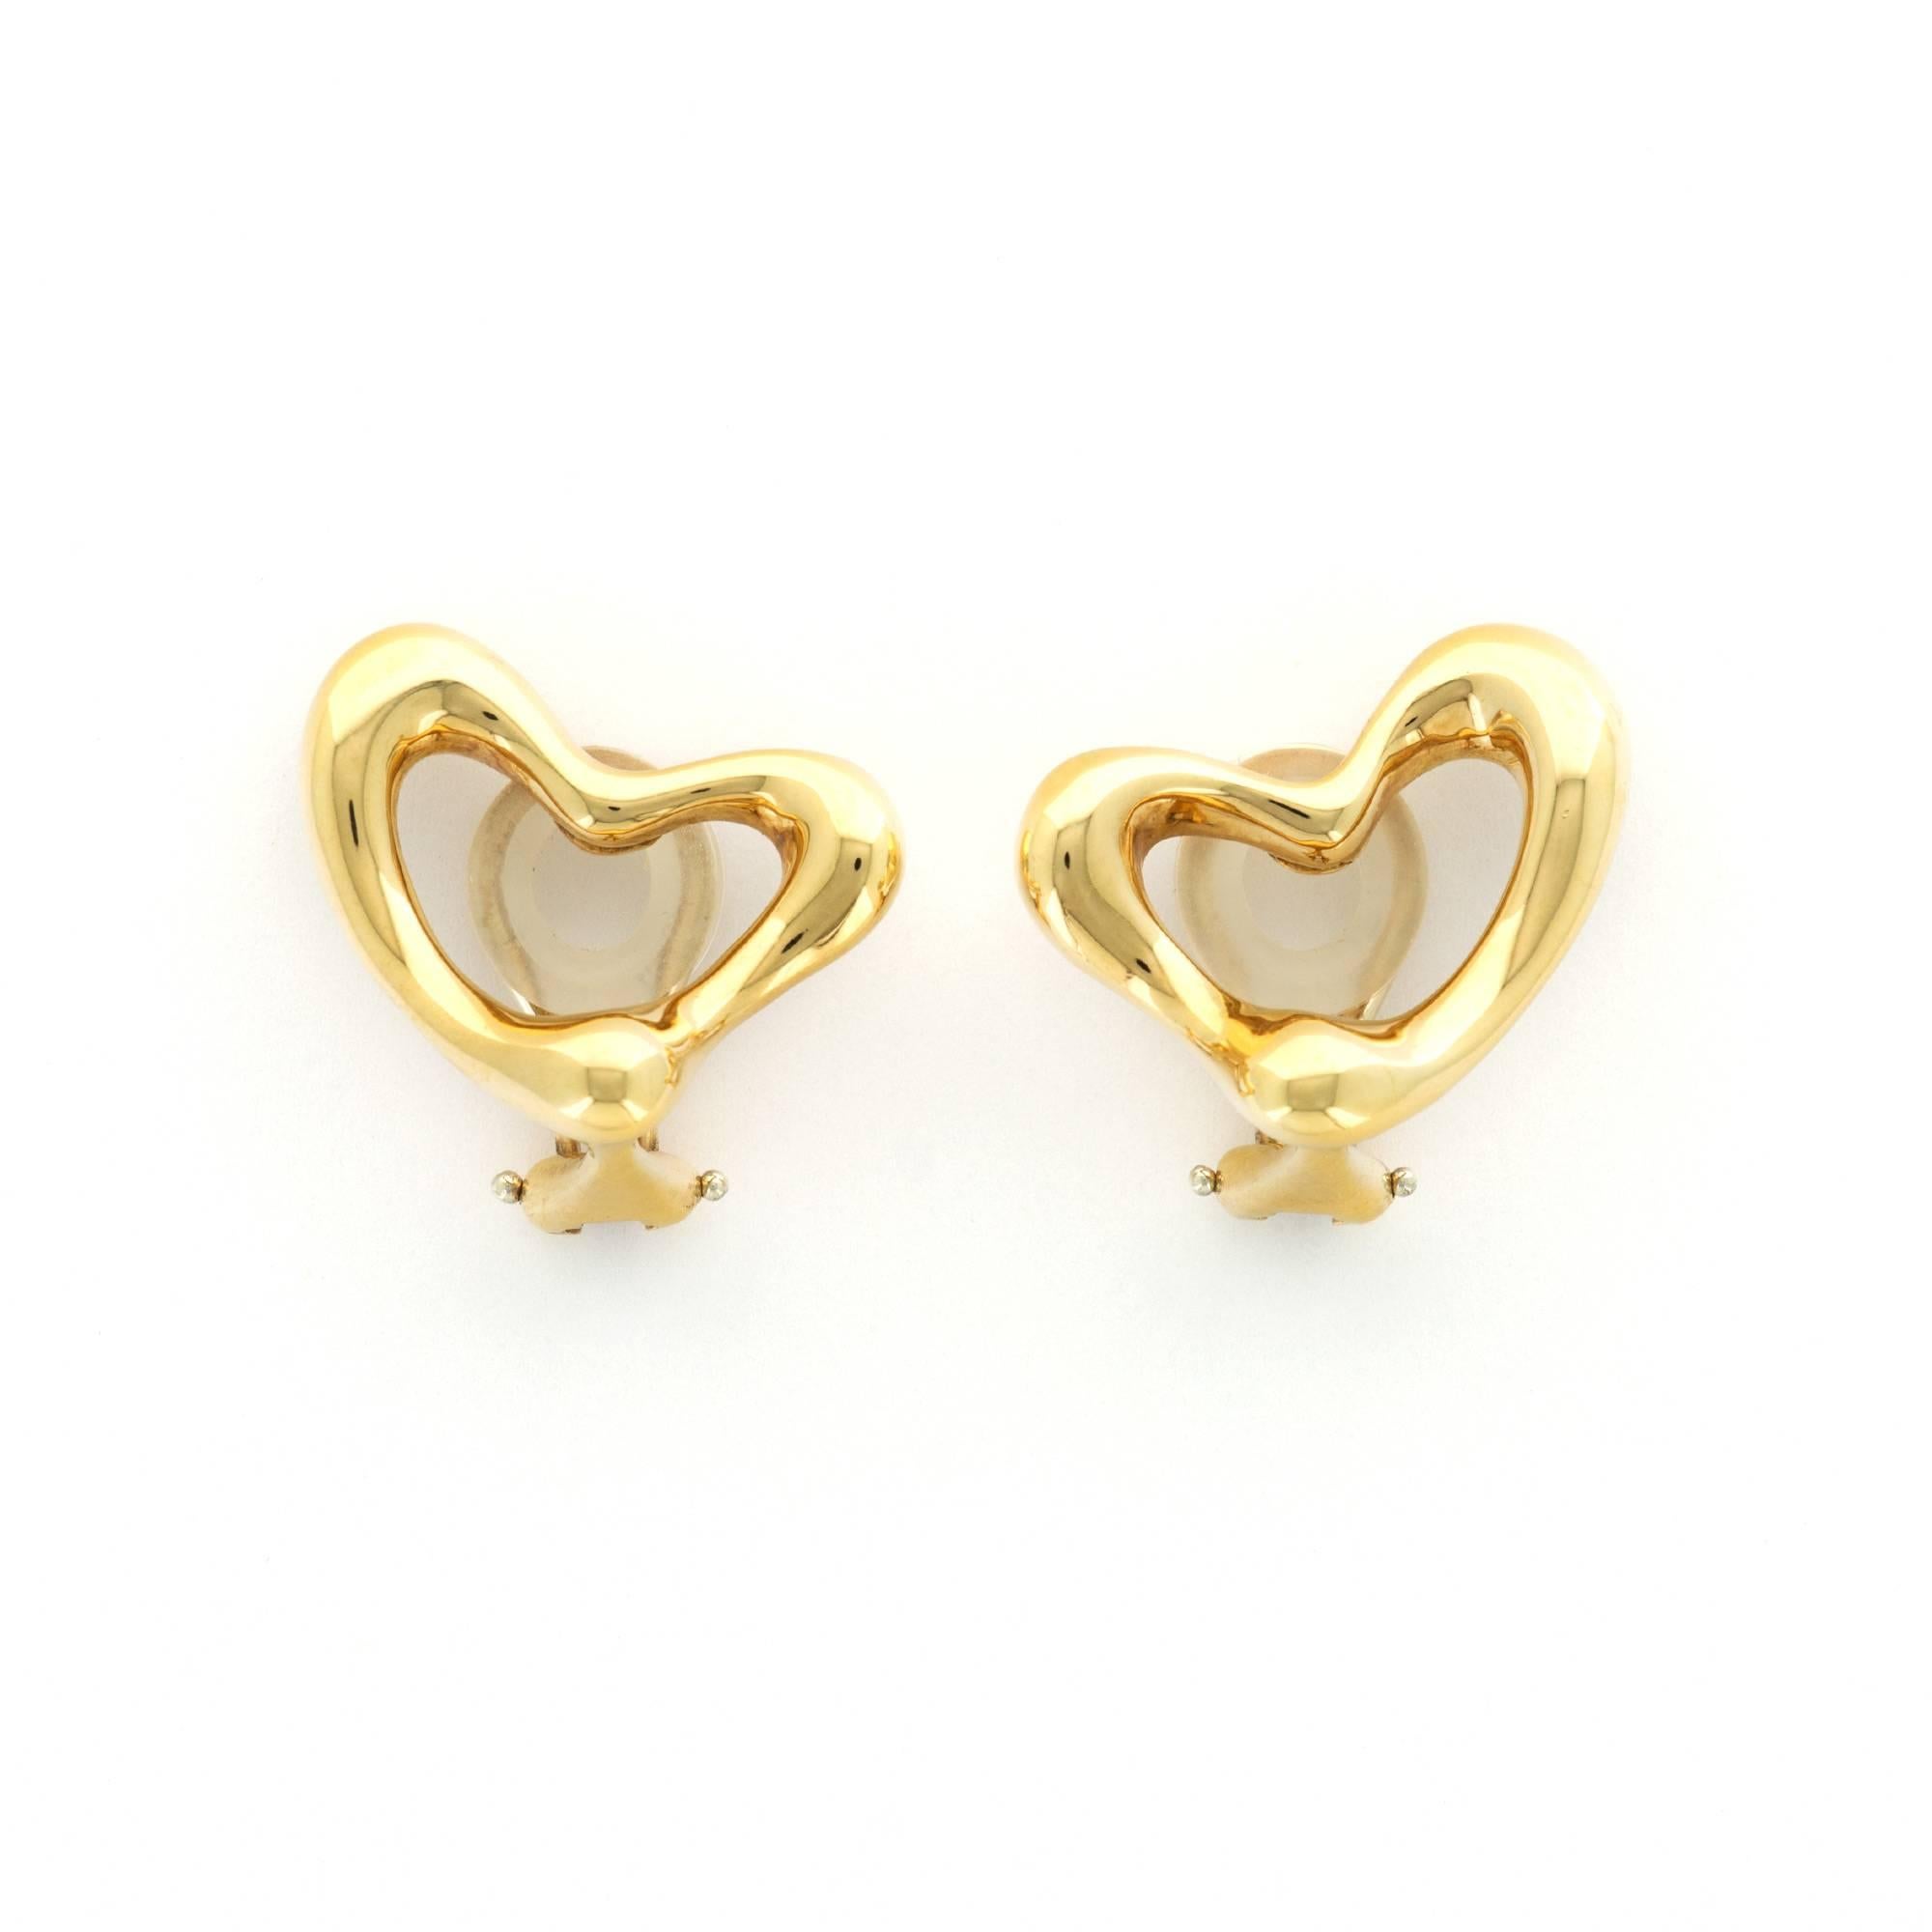 A Pair of 18k Yellow Gold Heart-Shaped Earrings Designed by Elsa Peretti for Tiffany & Co. 